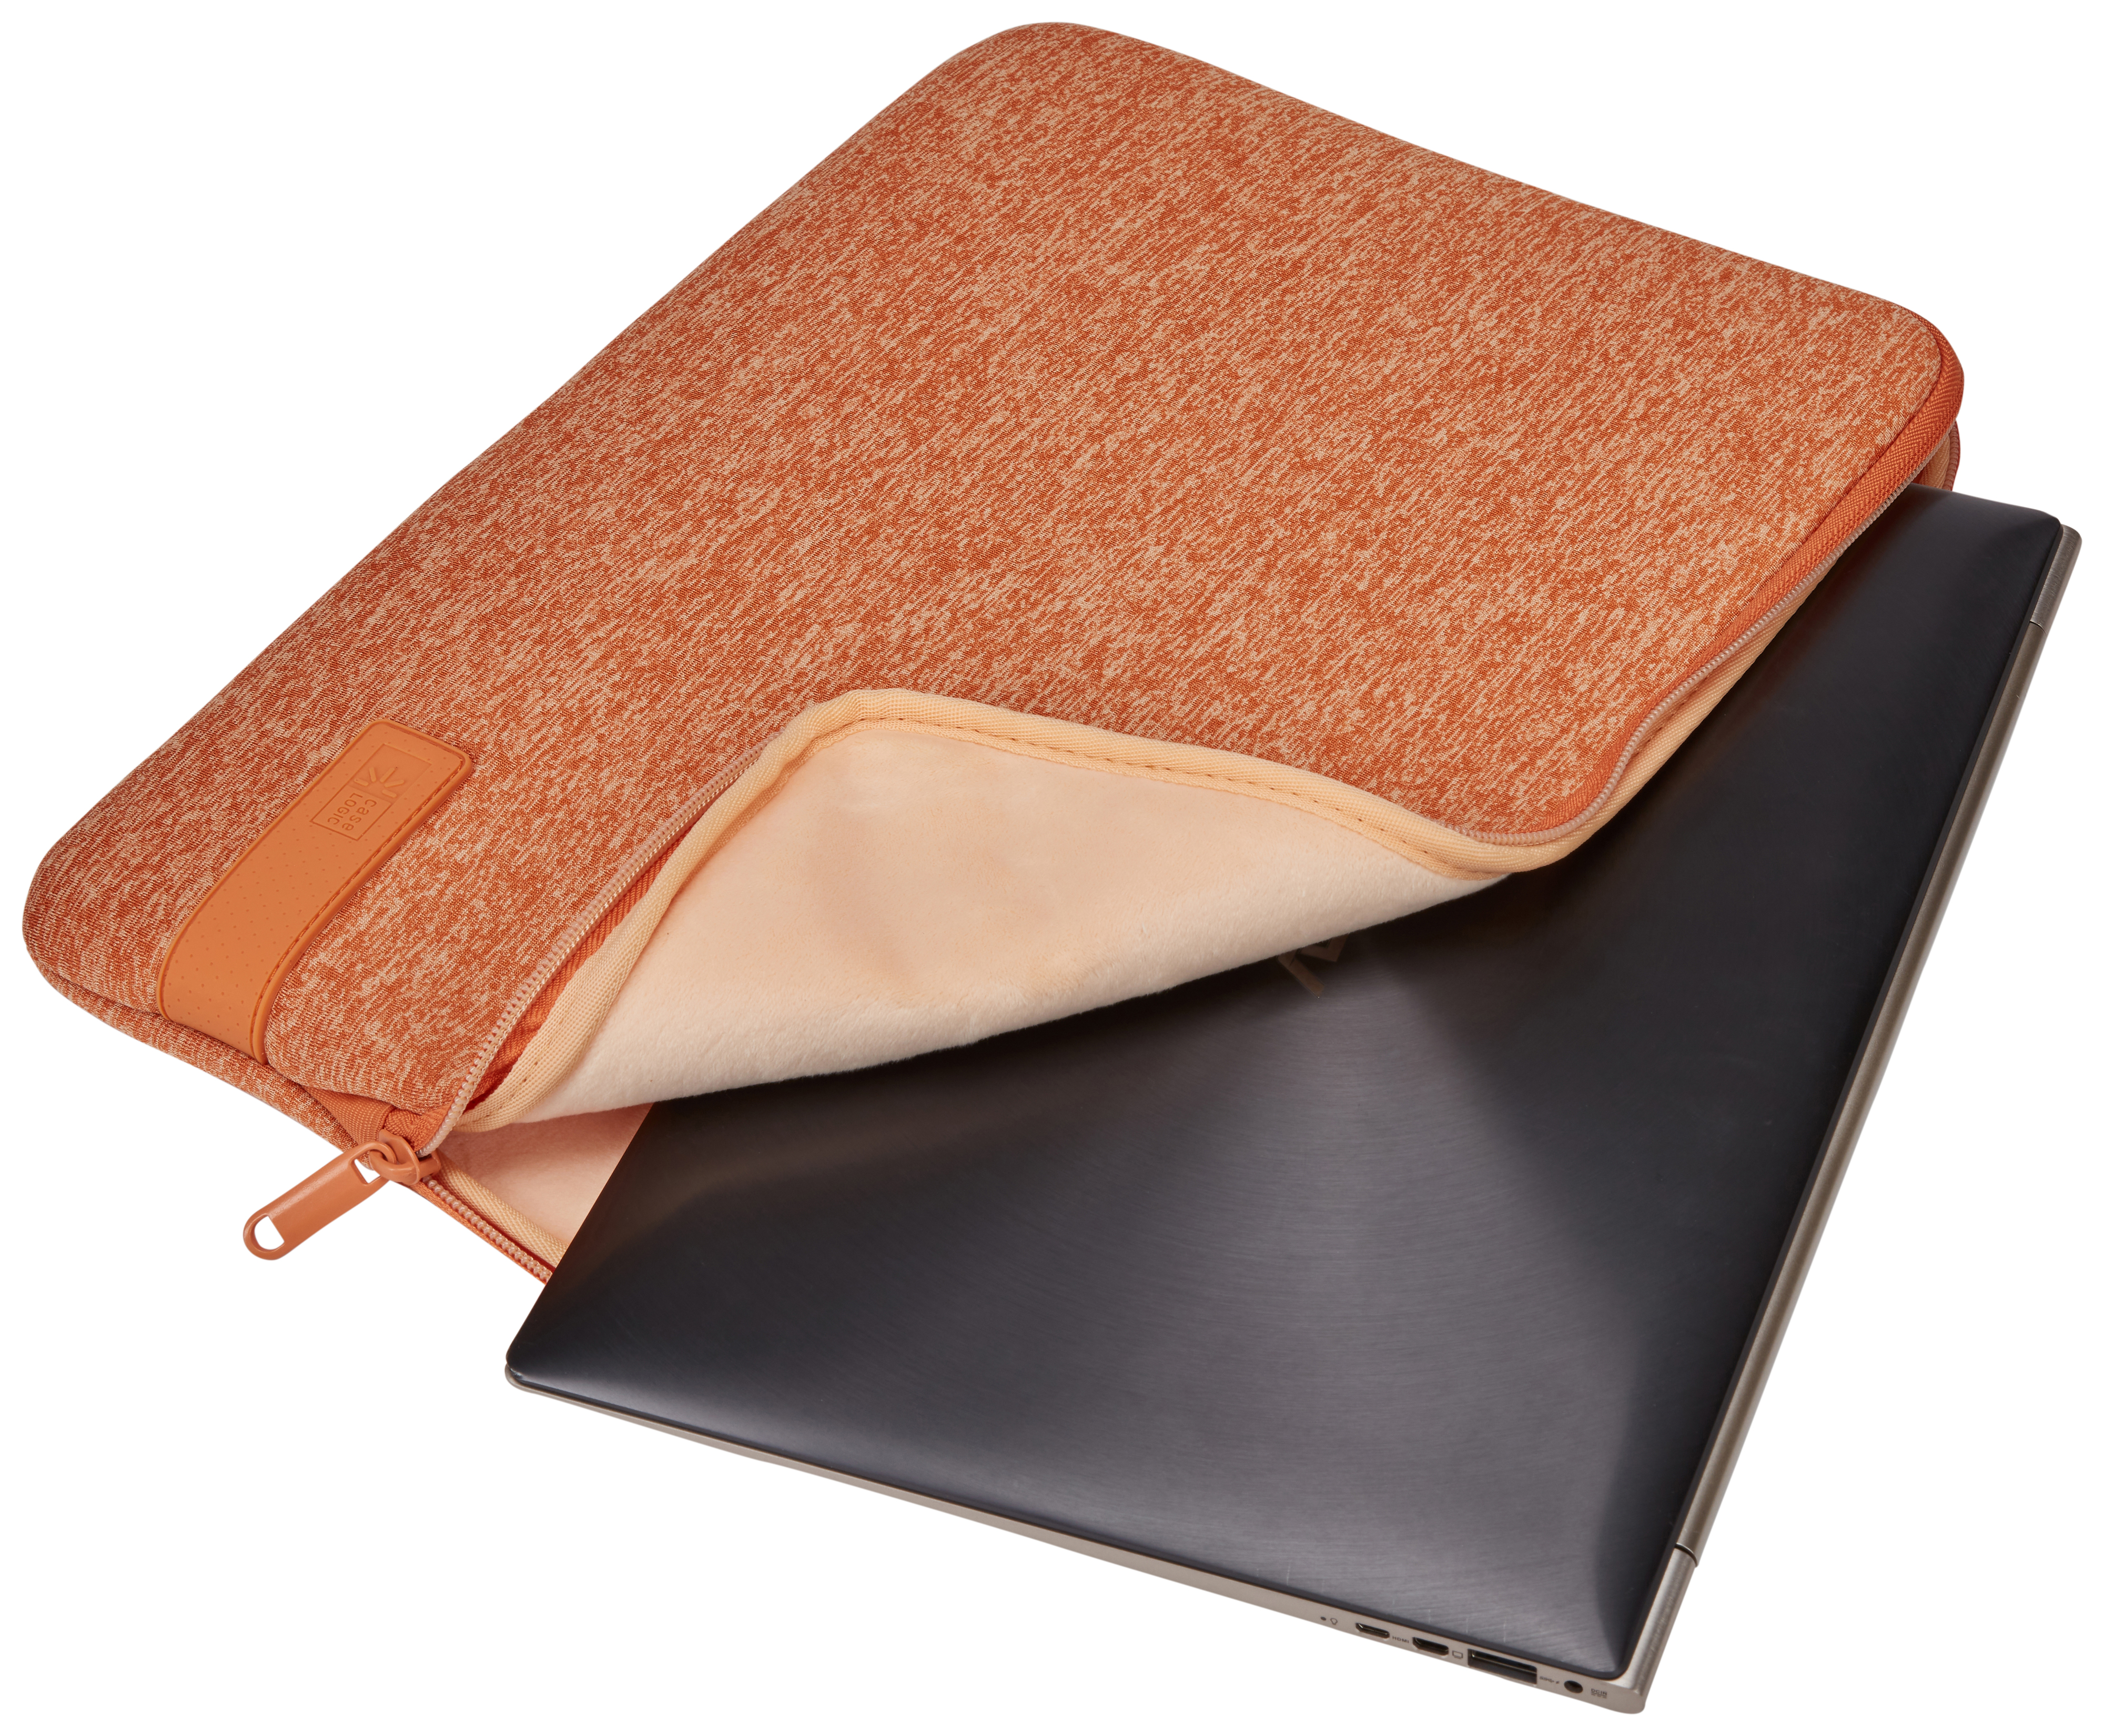 Coral LOGIC Notebook Universal Reflect Sleeve Sleeve Polyester, für CASE Gold/Apricot